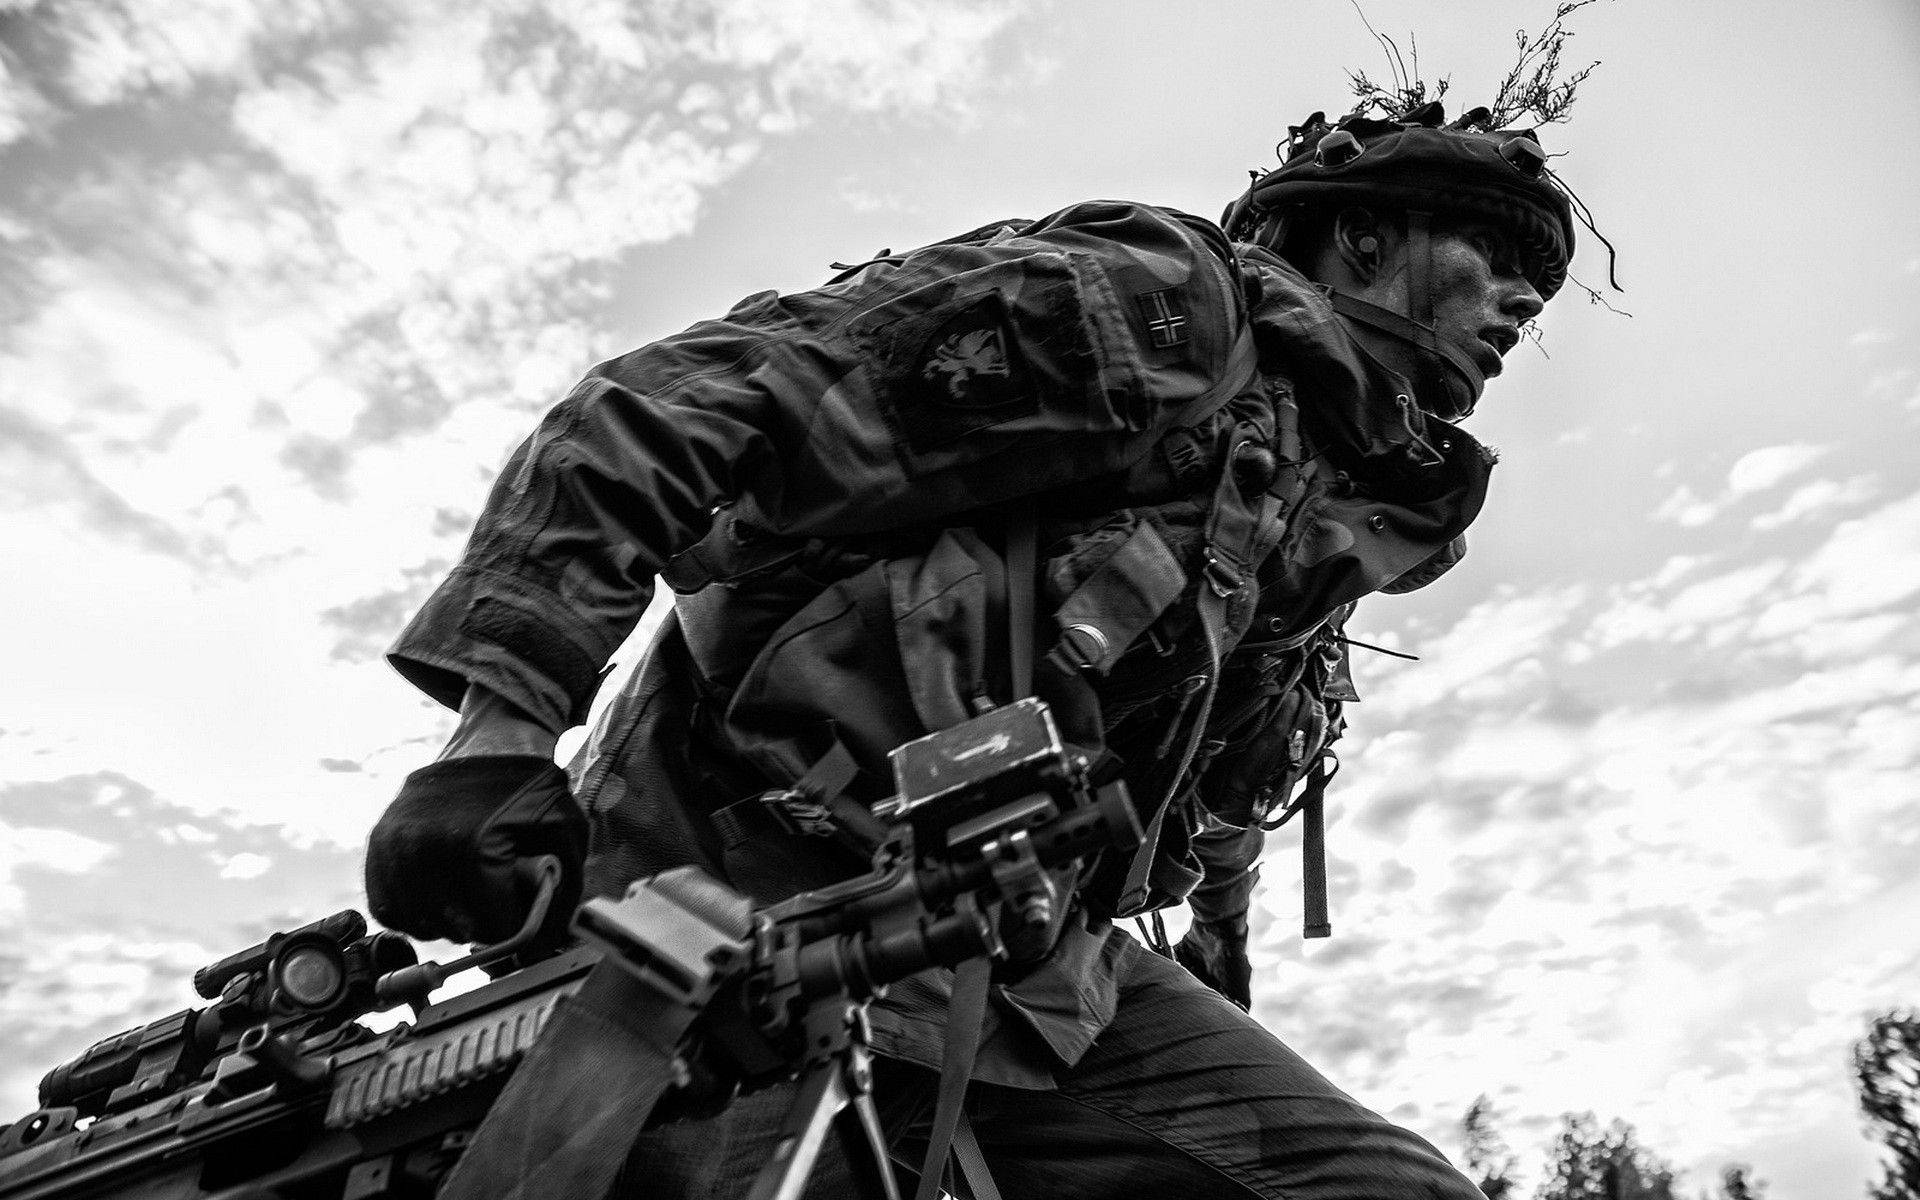 Armed Military In Monochrome